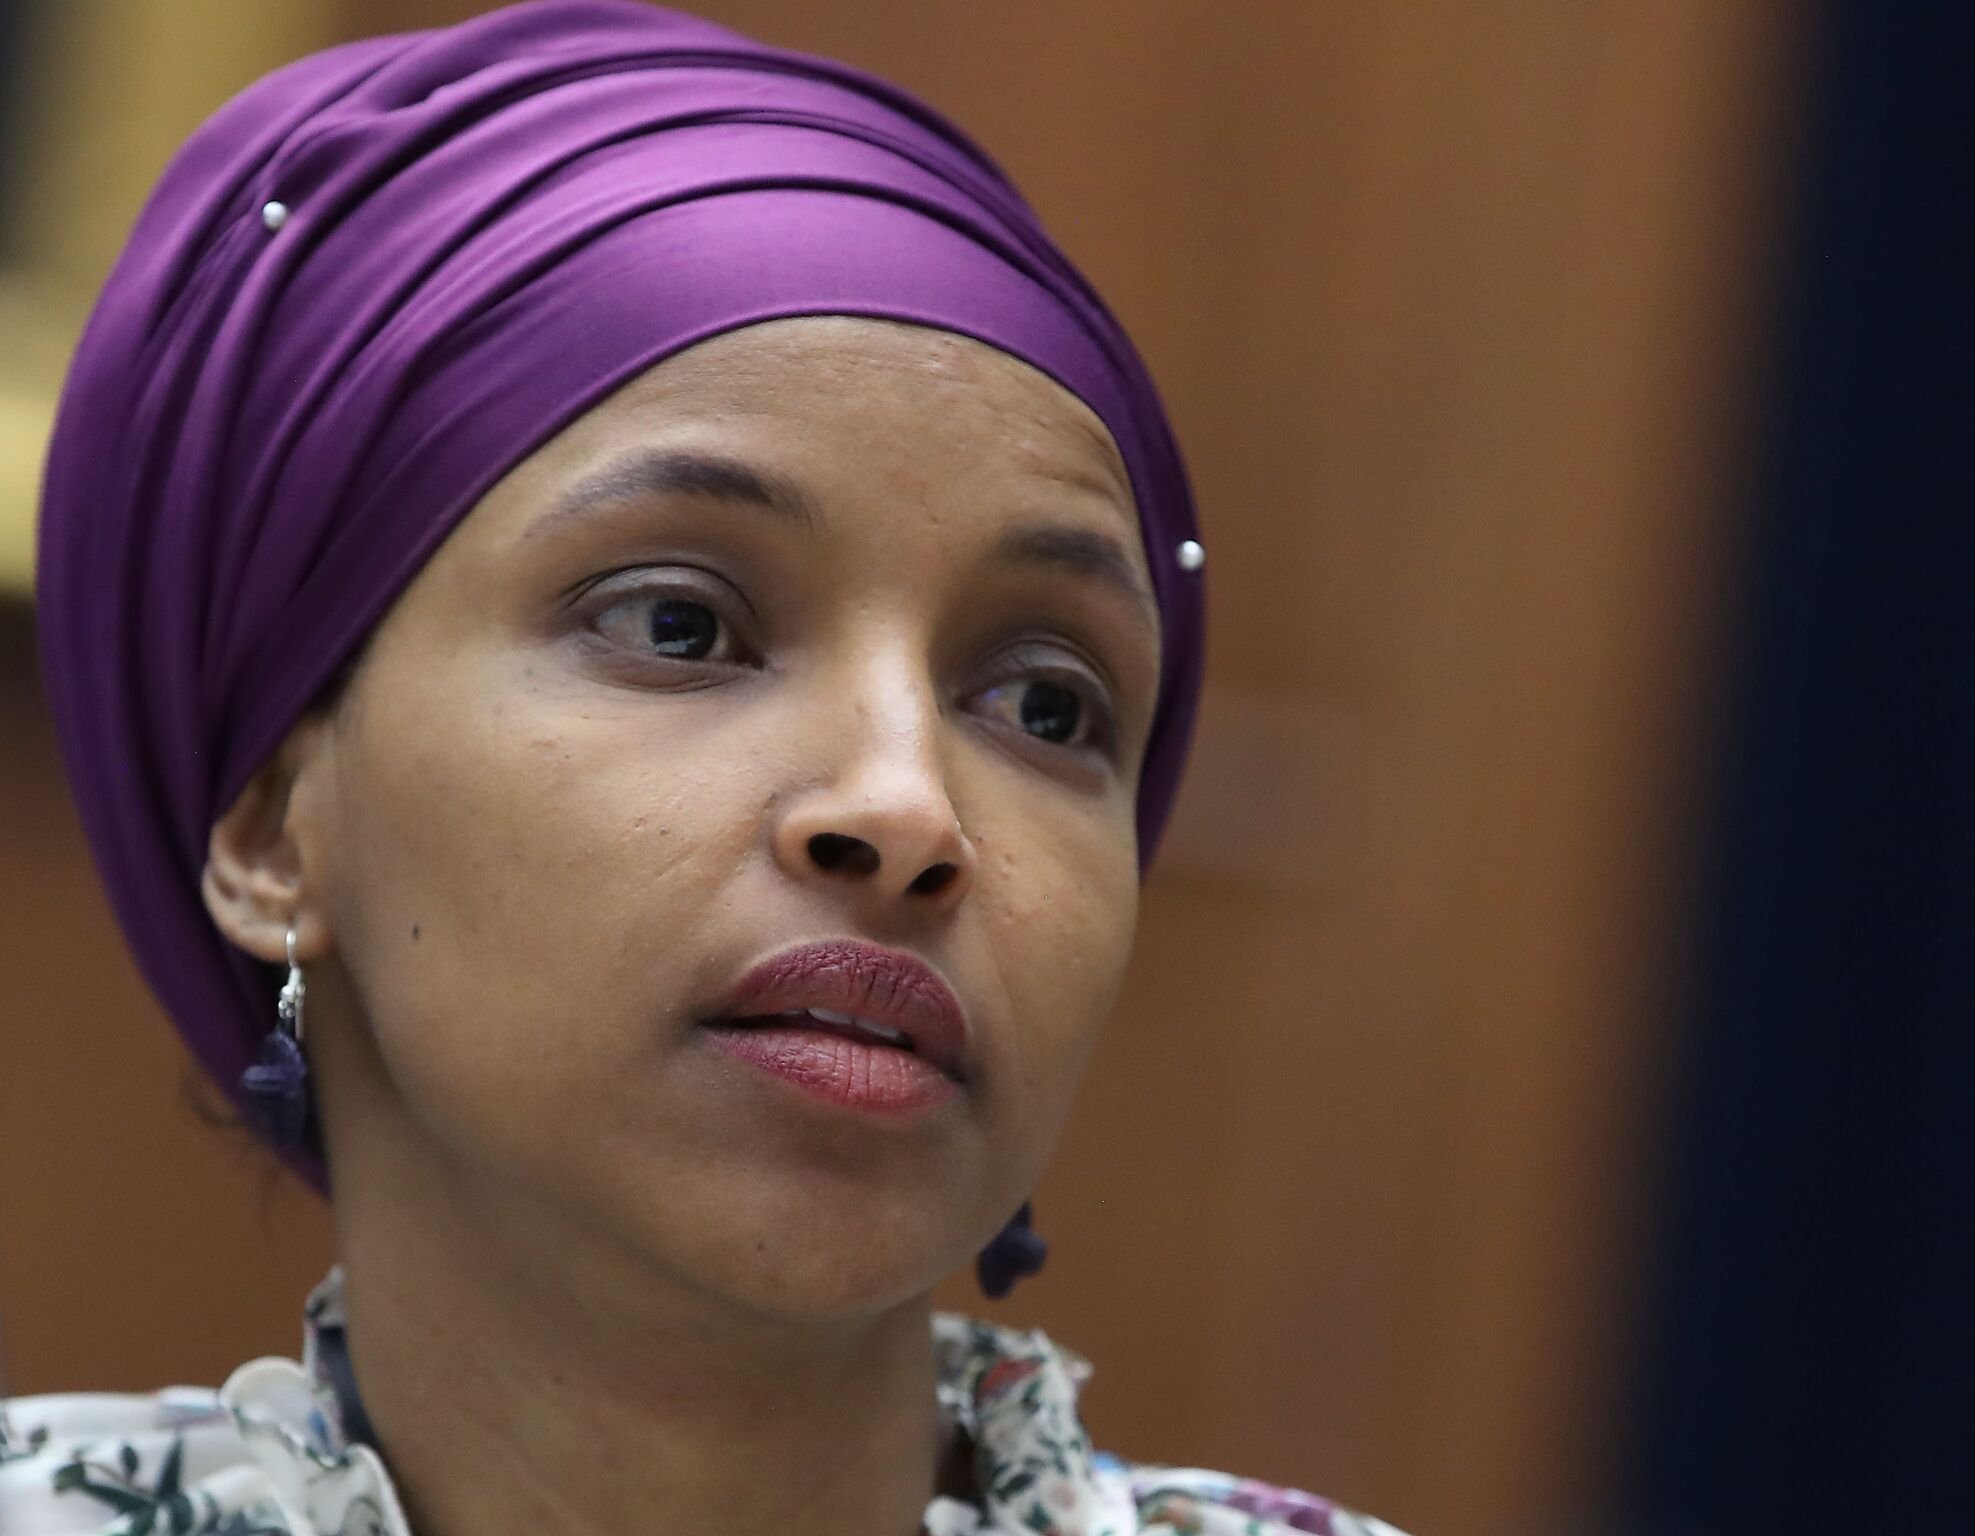 Rep. Ilhan Omar (D-MN) participates in a House Education and Labor Committee Markup on the H.R. 582 Raise The Wage Act, in the Rayburn House Office Building on March 6, 2019 | Photo: Getty Images